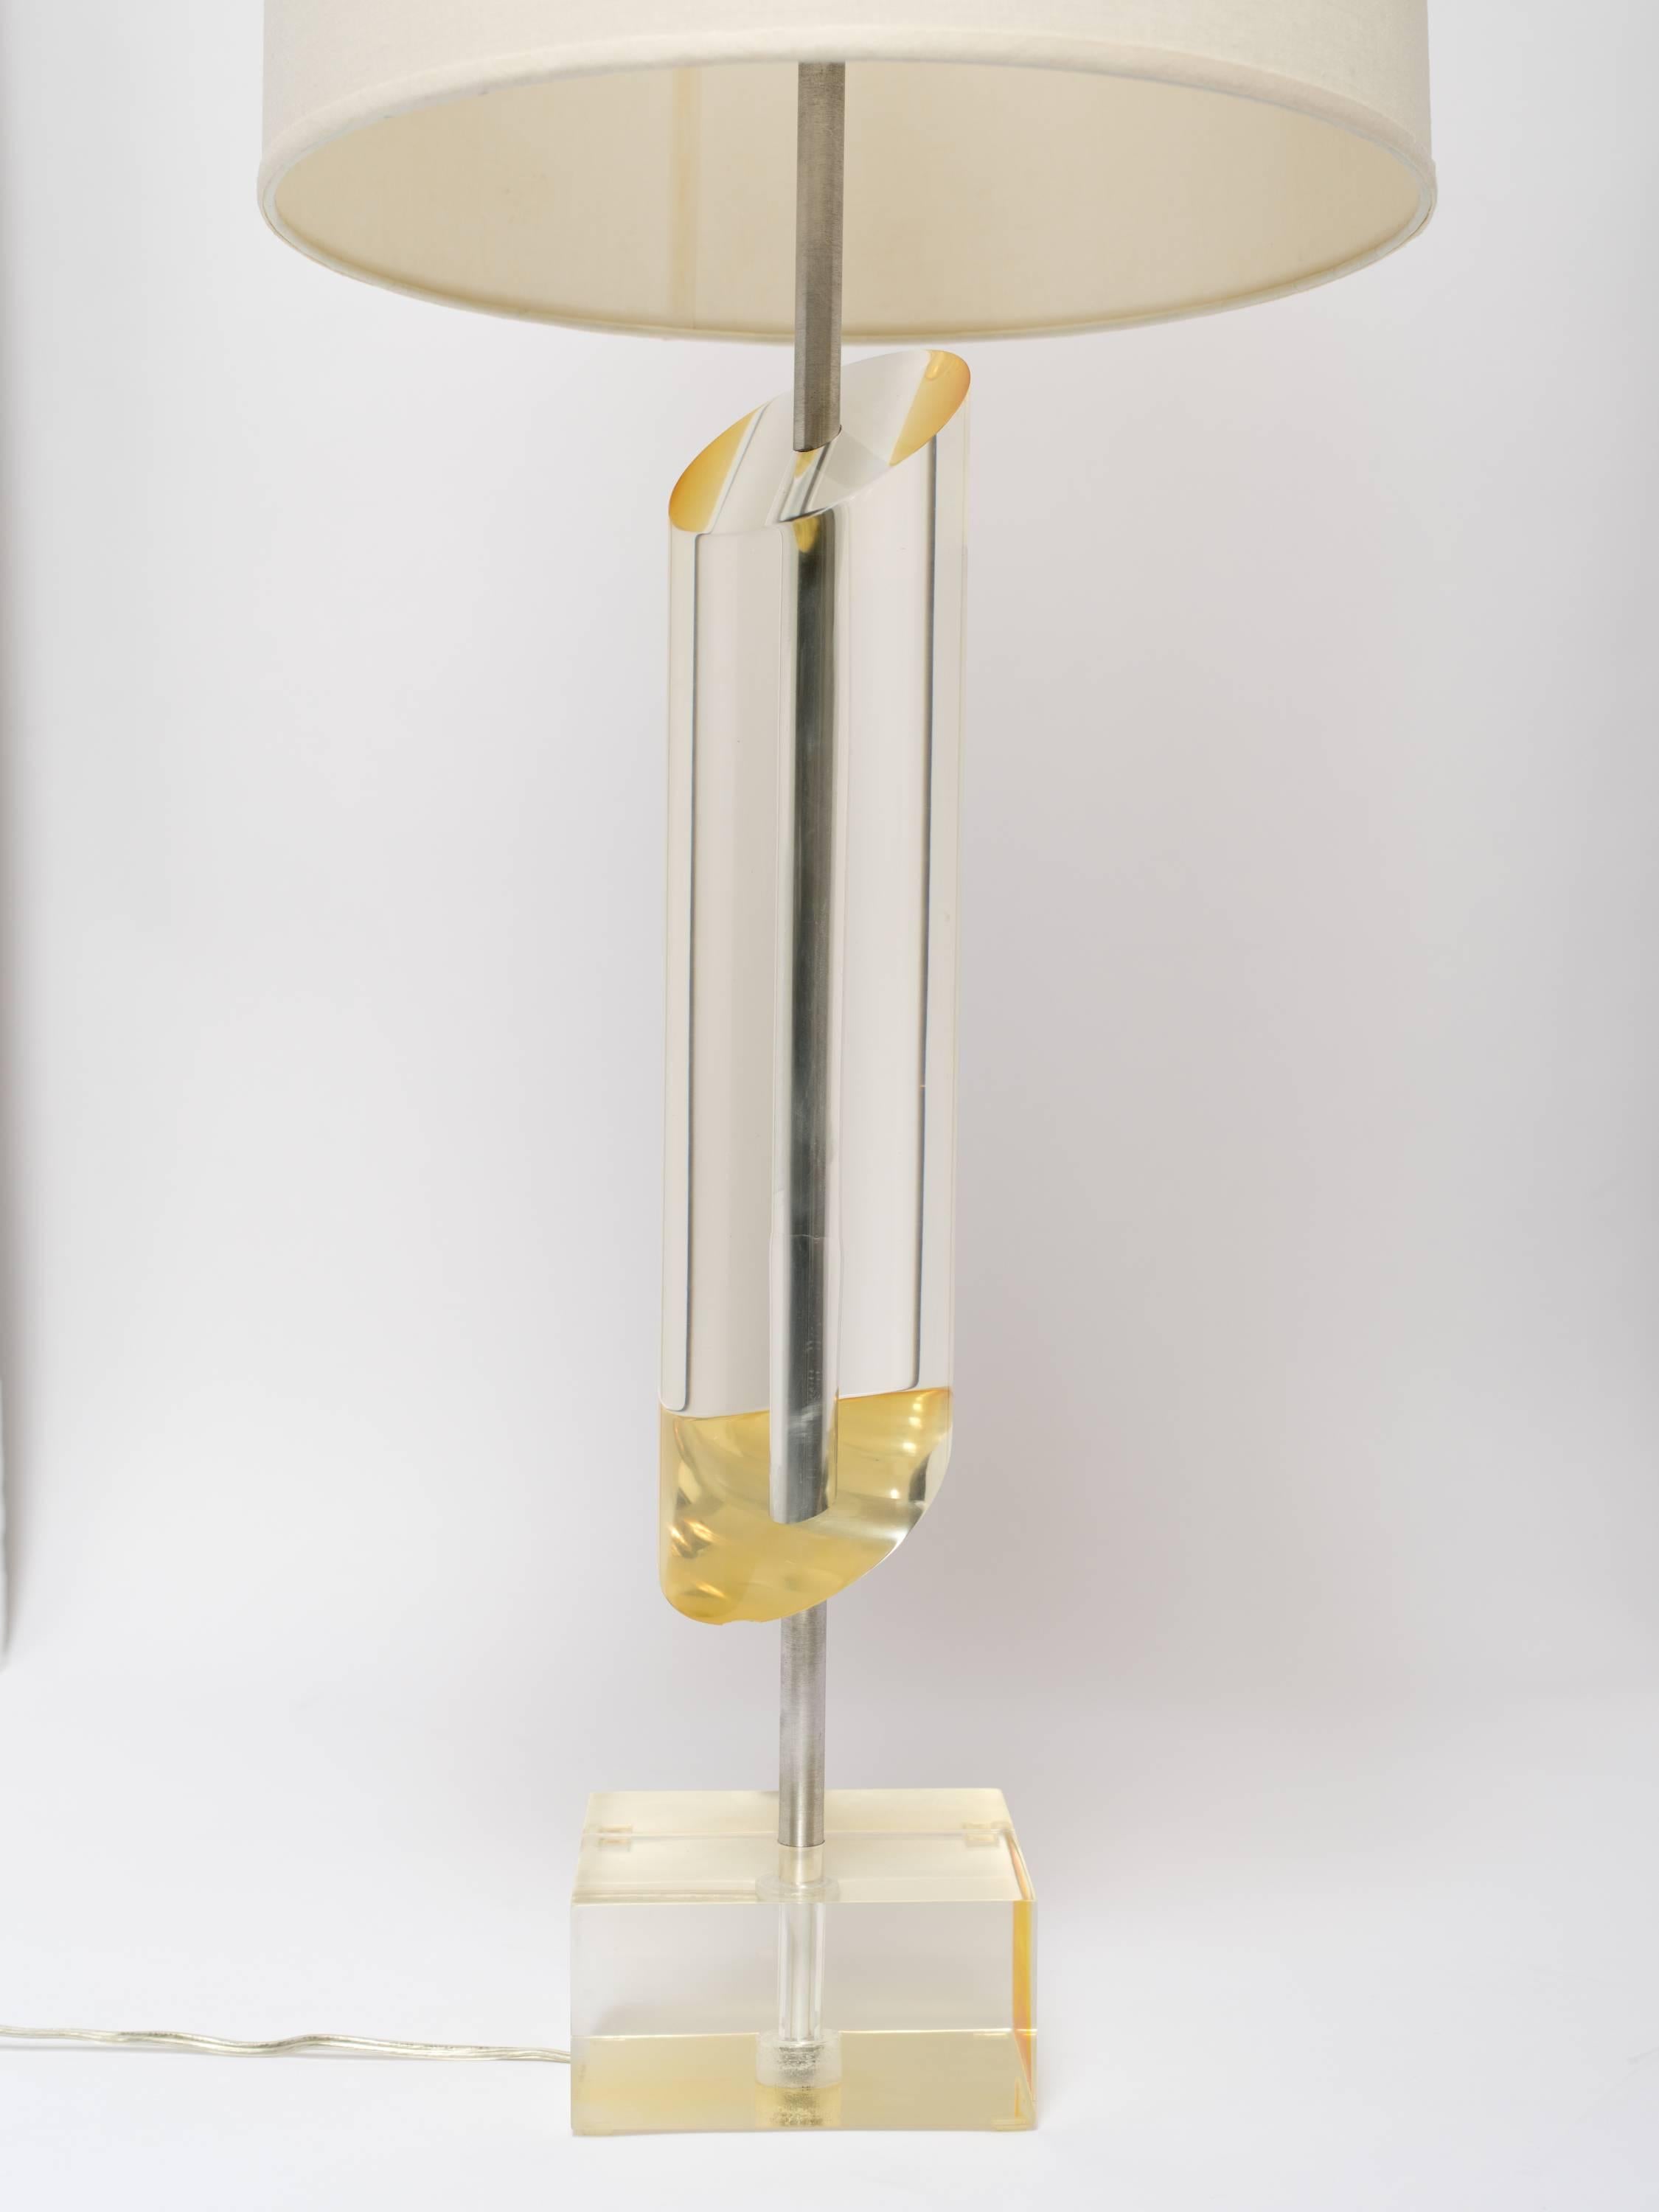 Mid-Century Modern Skyscraper style lamp in solid Lucite with golden amber undertones. The architectural lamp has a slanted asymmetrical column with a thick square base. The lamp is fitted with two lights with on and off chain pulls. Shown with tall